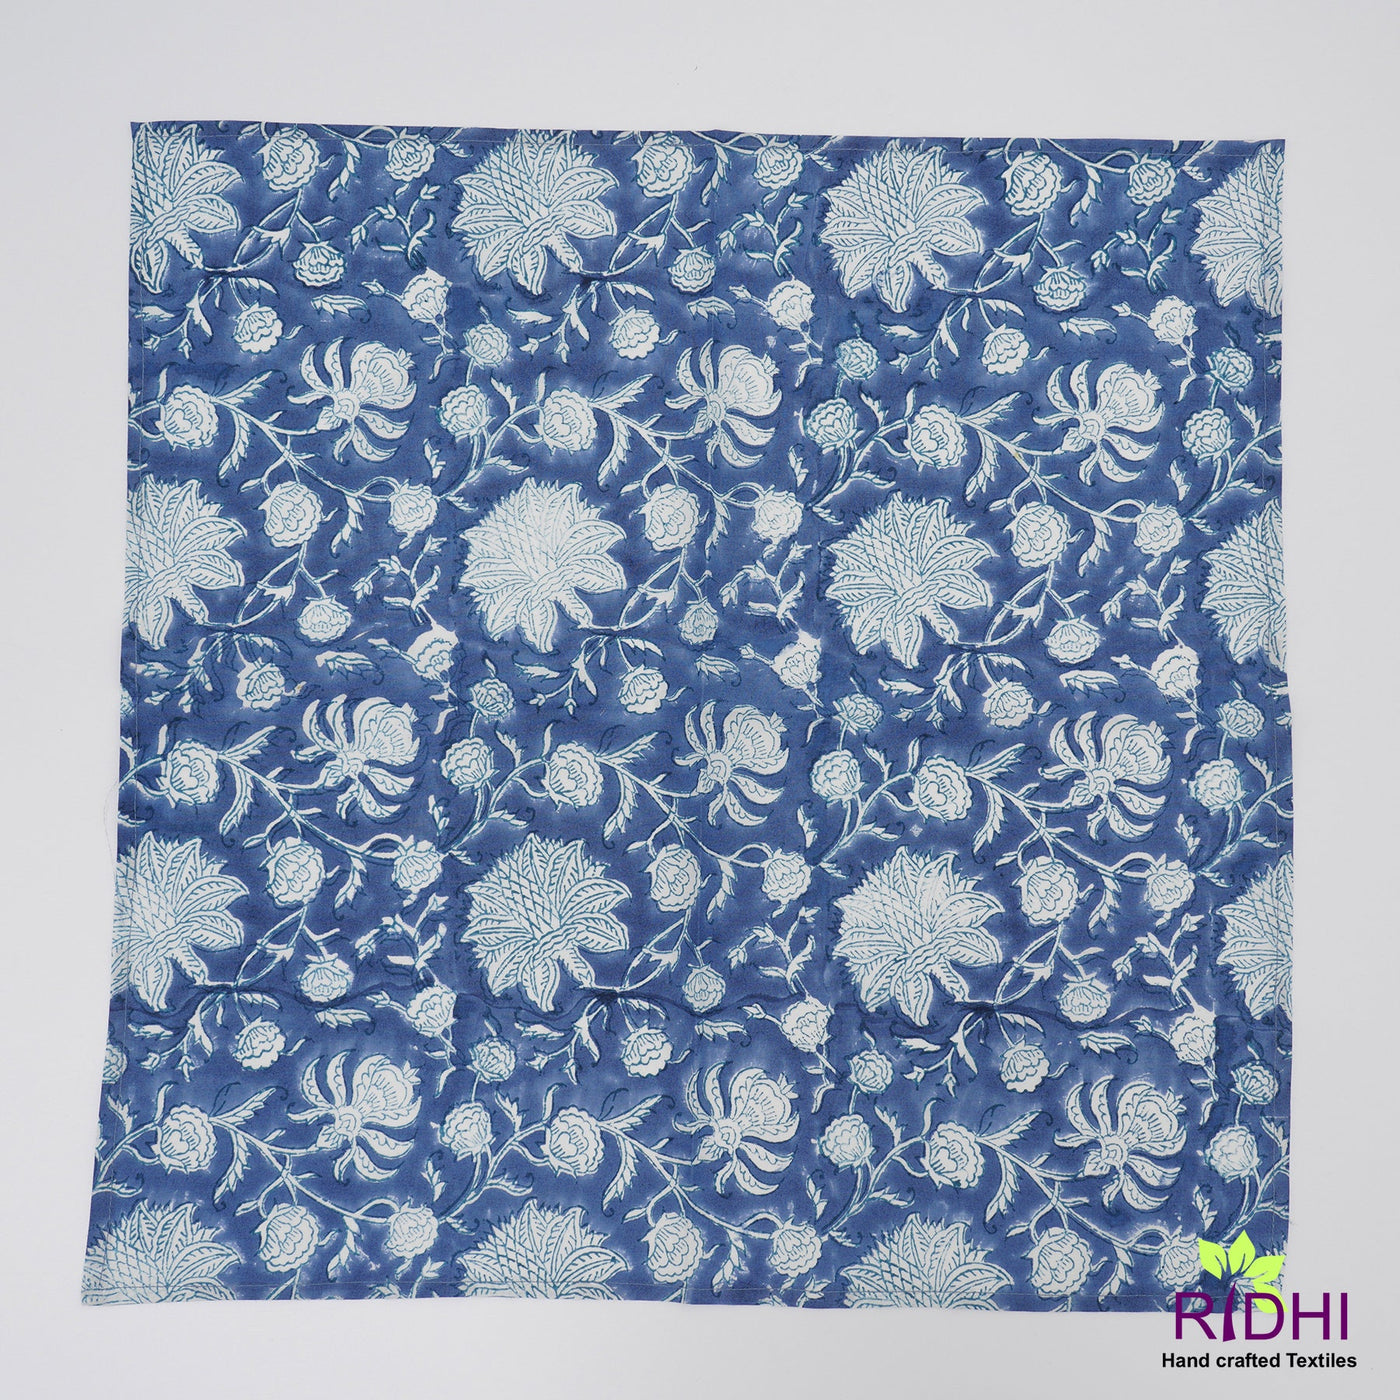 Prussian Blue and White Indian Floral Hand Block Print 100% Pure Cotton Cloth Napkins, Gift, 9x9"- Cocktail Napkins, 20x20"- Dinner Napkins